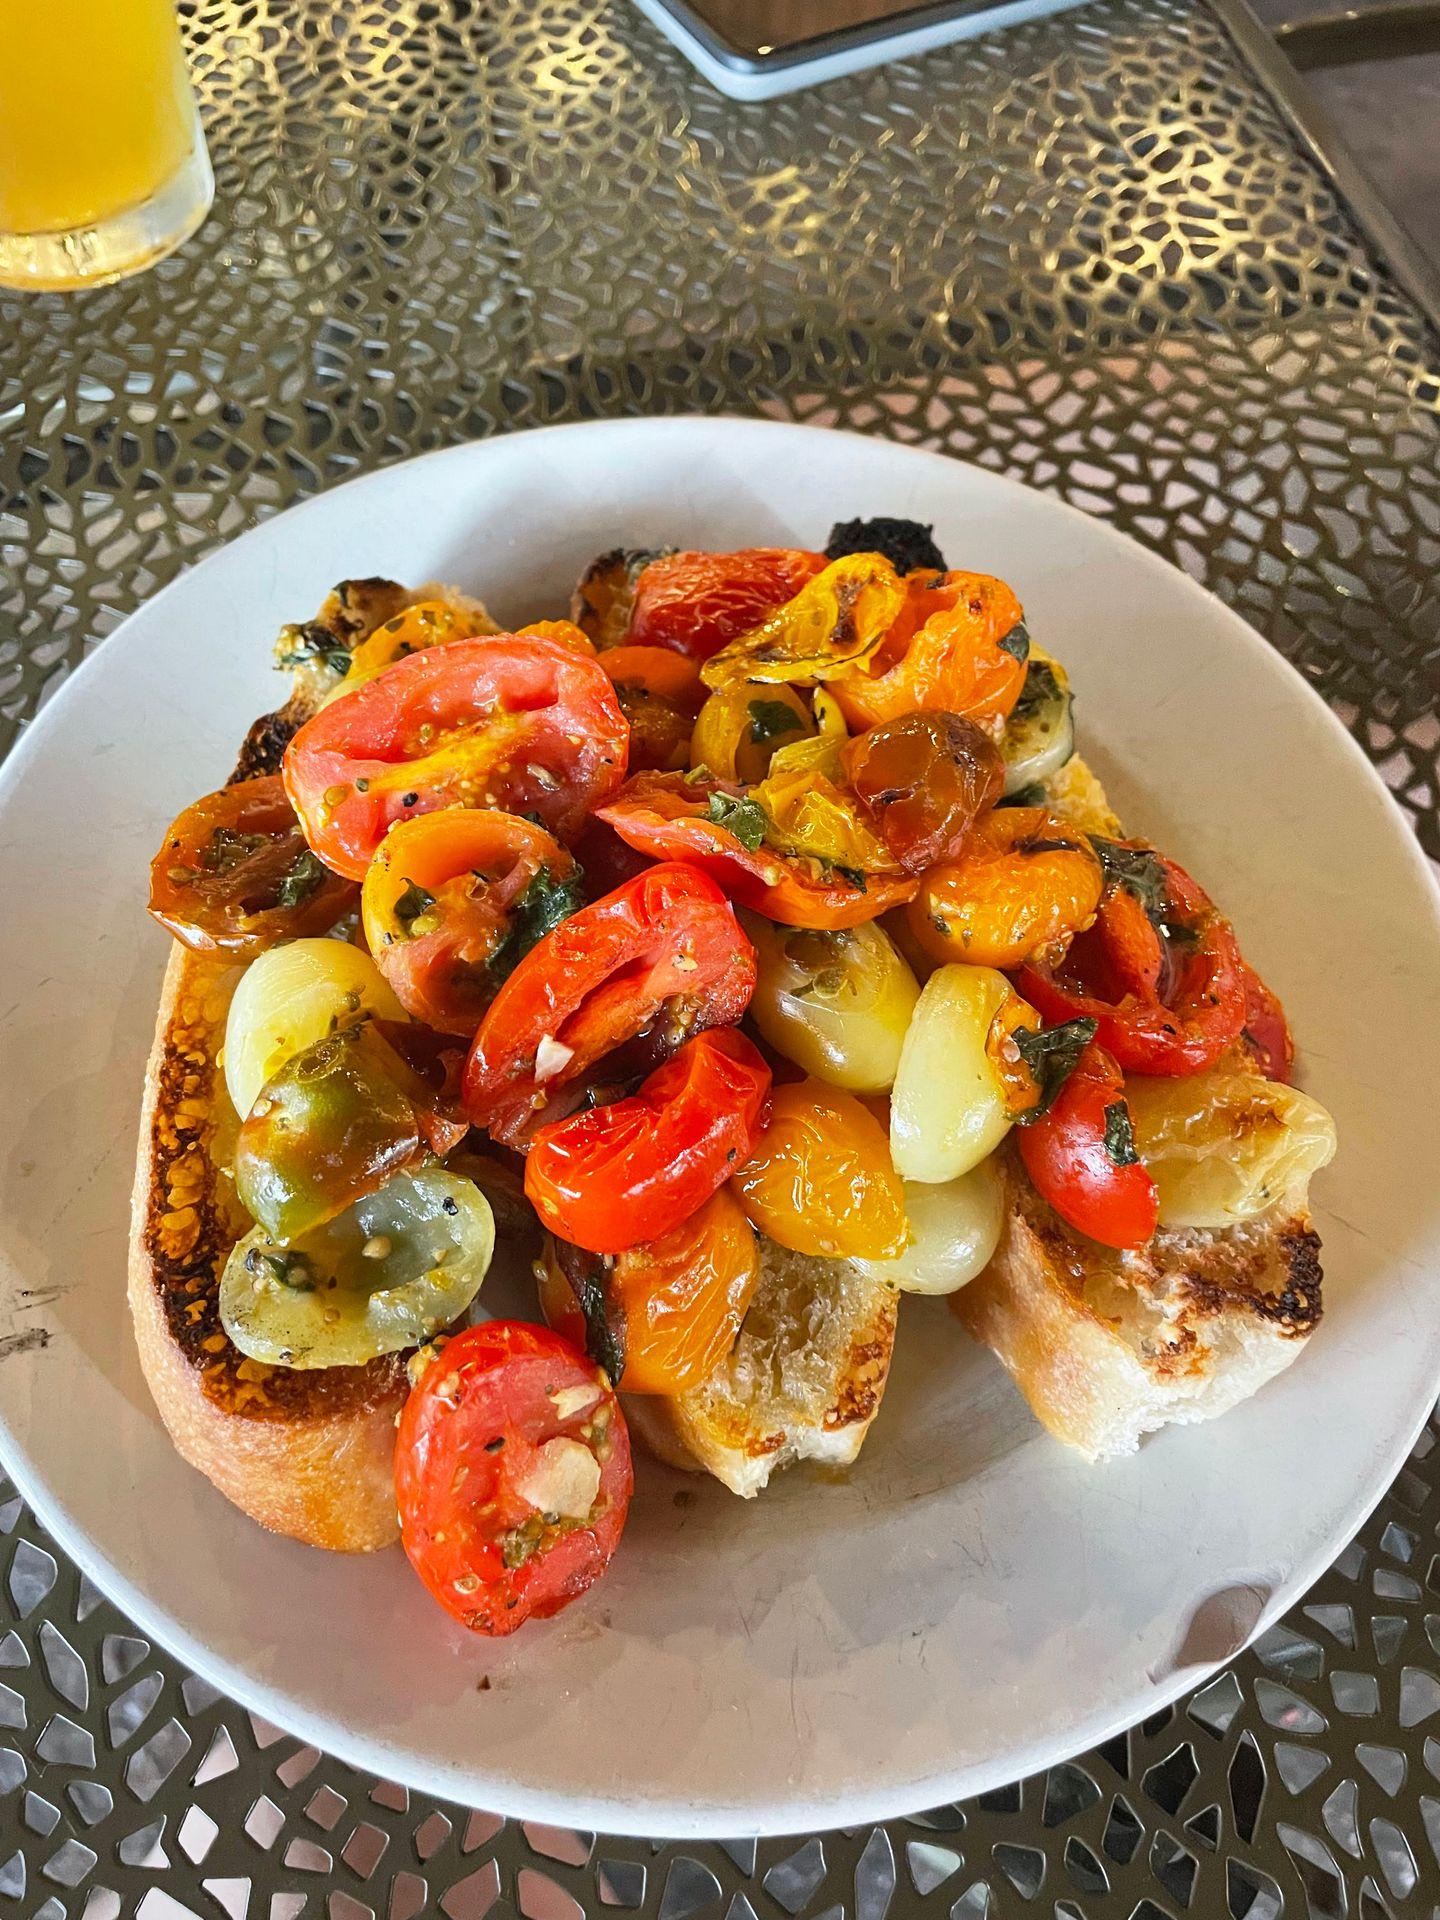 Three toasted pieces of bread topped with colorful cherry tomatoes at Antica Forma.